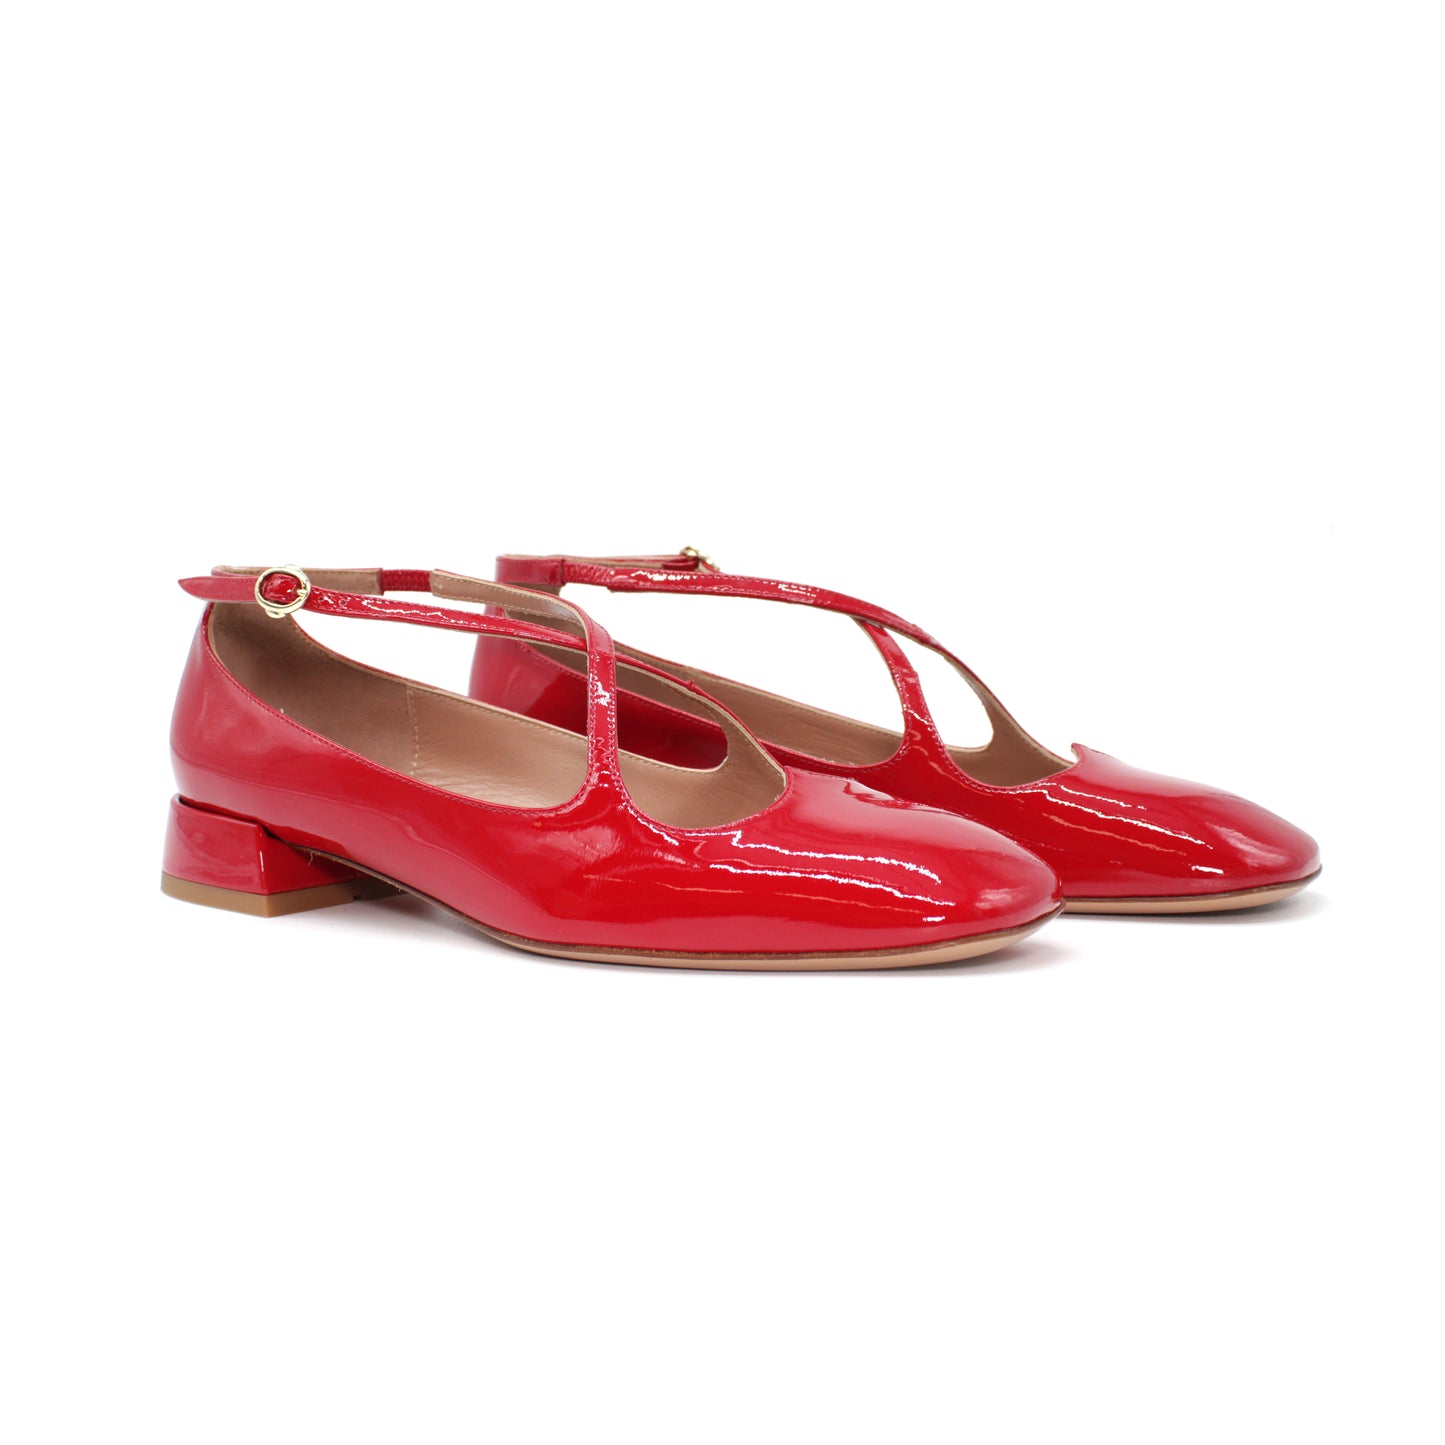 Pump Two for Love in red patent leather - Carry over